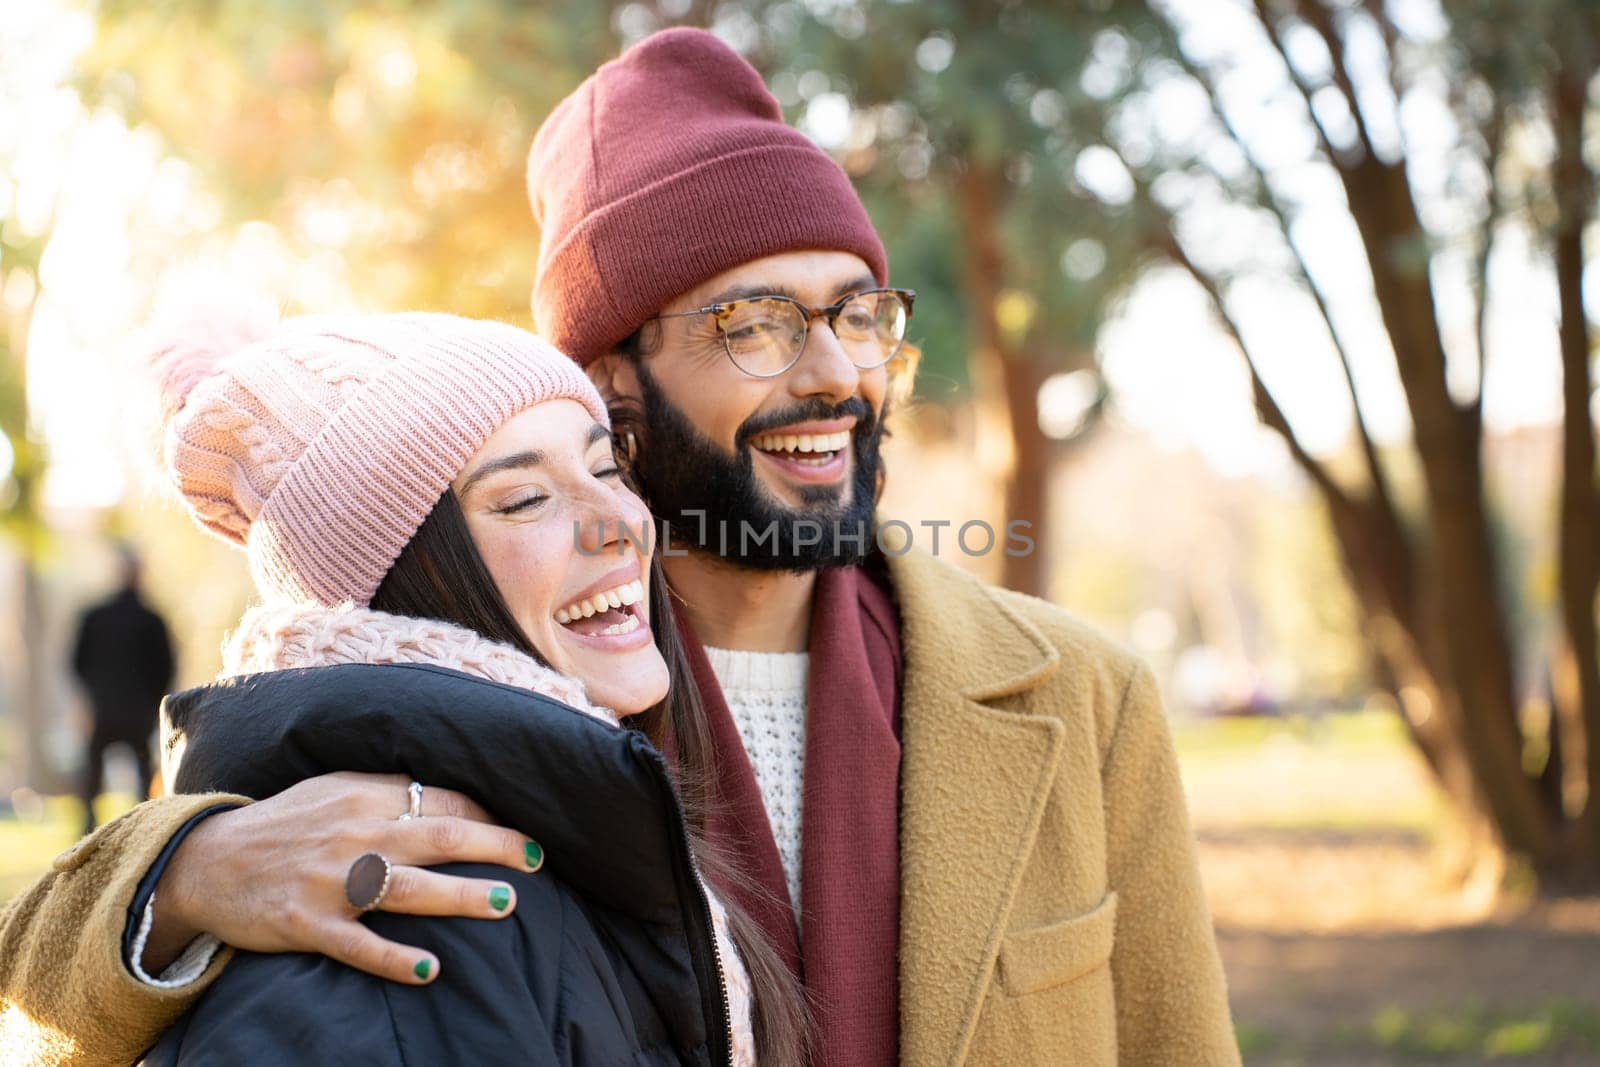 A man with a beard and wearing outerwear stands next to a happy woman in a park. He gestures with his finger, both wearing headgear and smiling